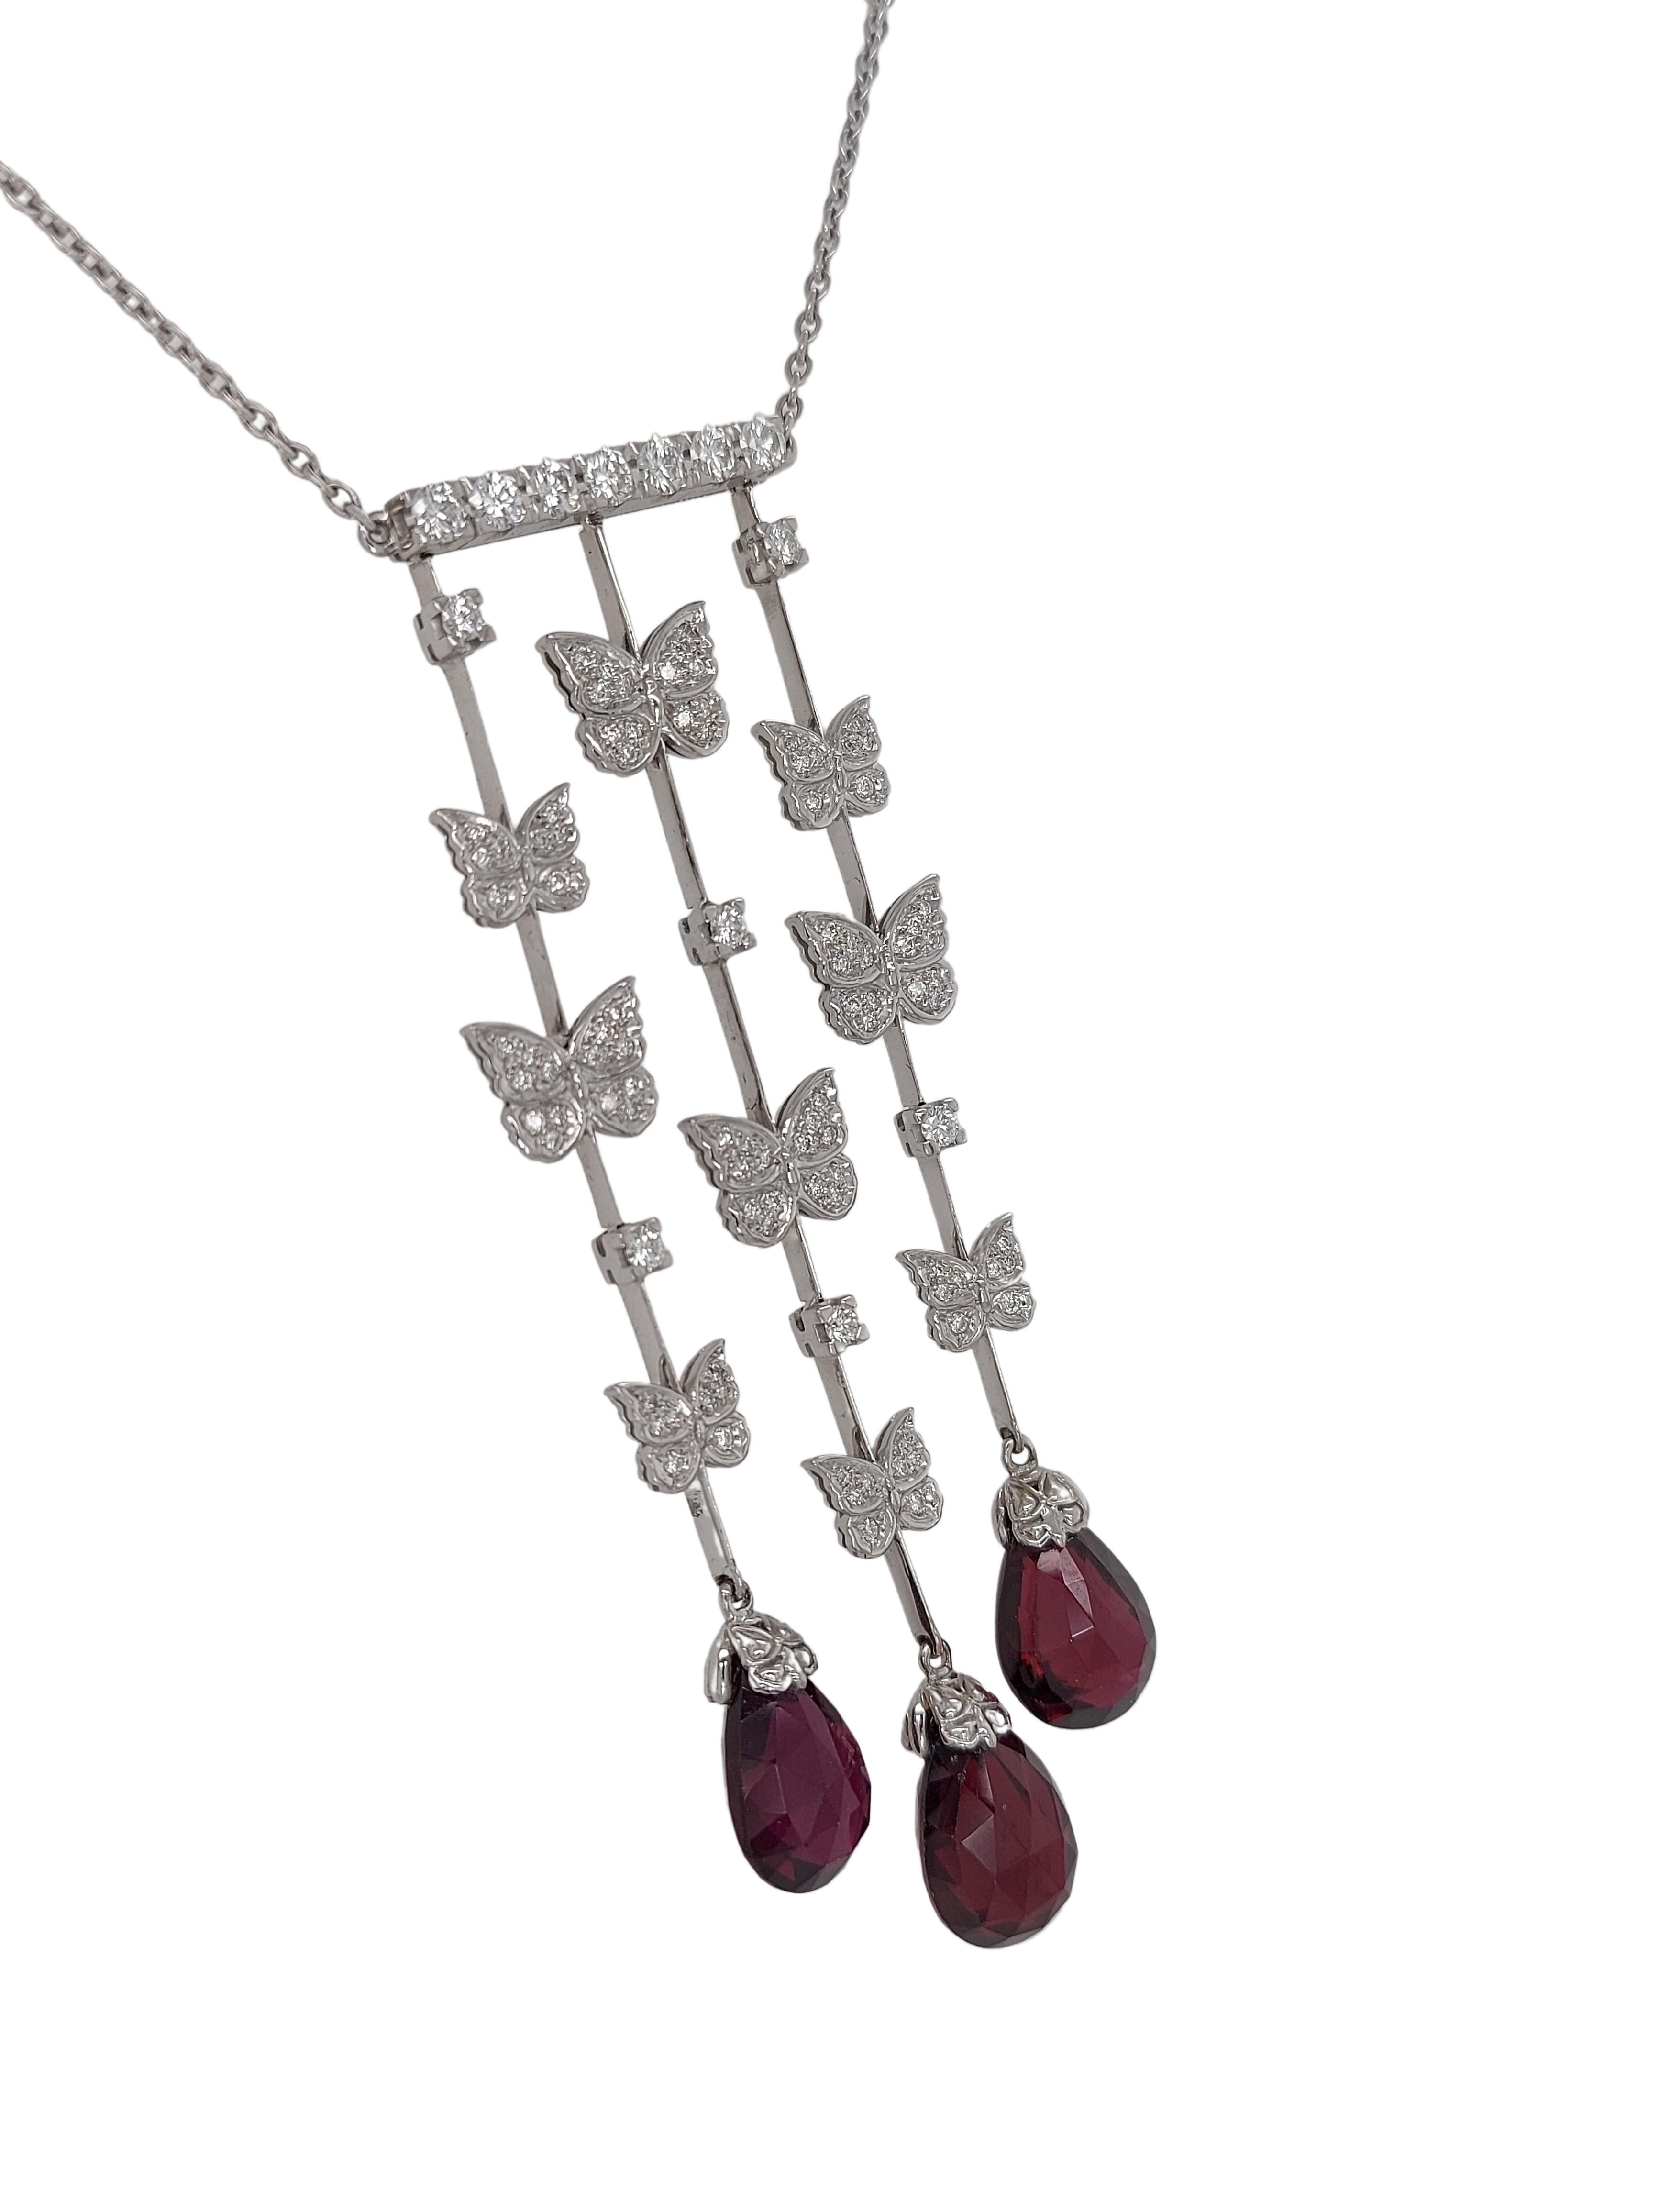 Briolette Cut 18kt Gold Carrara Y Carrara Pendant Drop Necklace from the Butterfly Collection For Sale